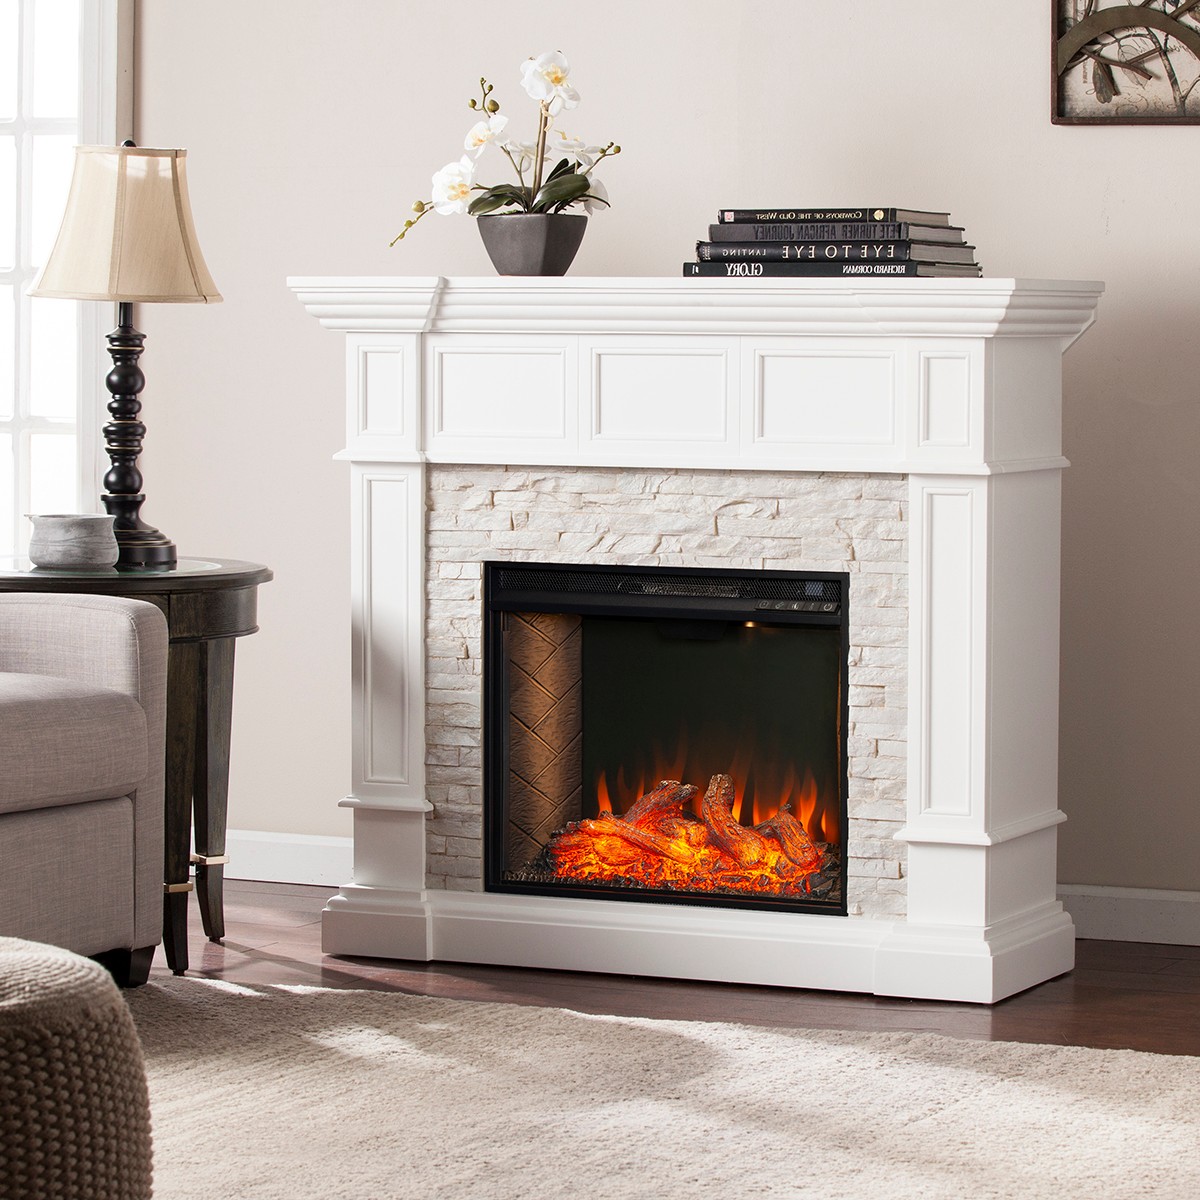 Pleasant Hearth Gas Fireplace Elegant southern Enterprises Merrimack Simulated Stone Convertible Electric Fireplace